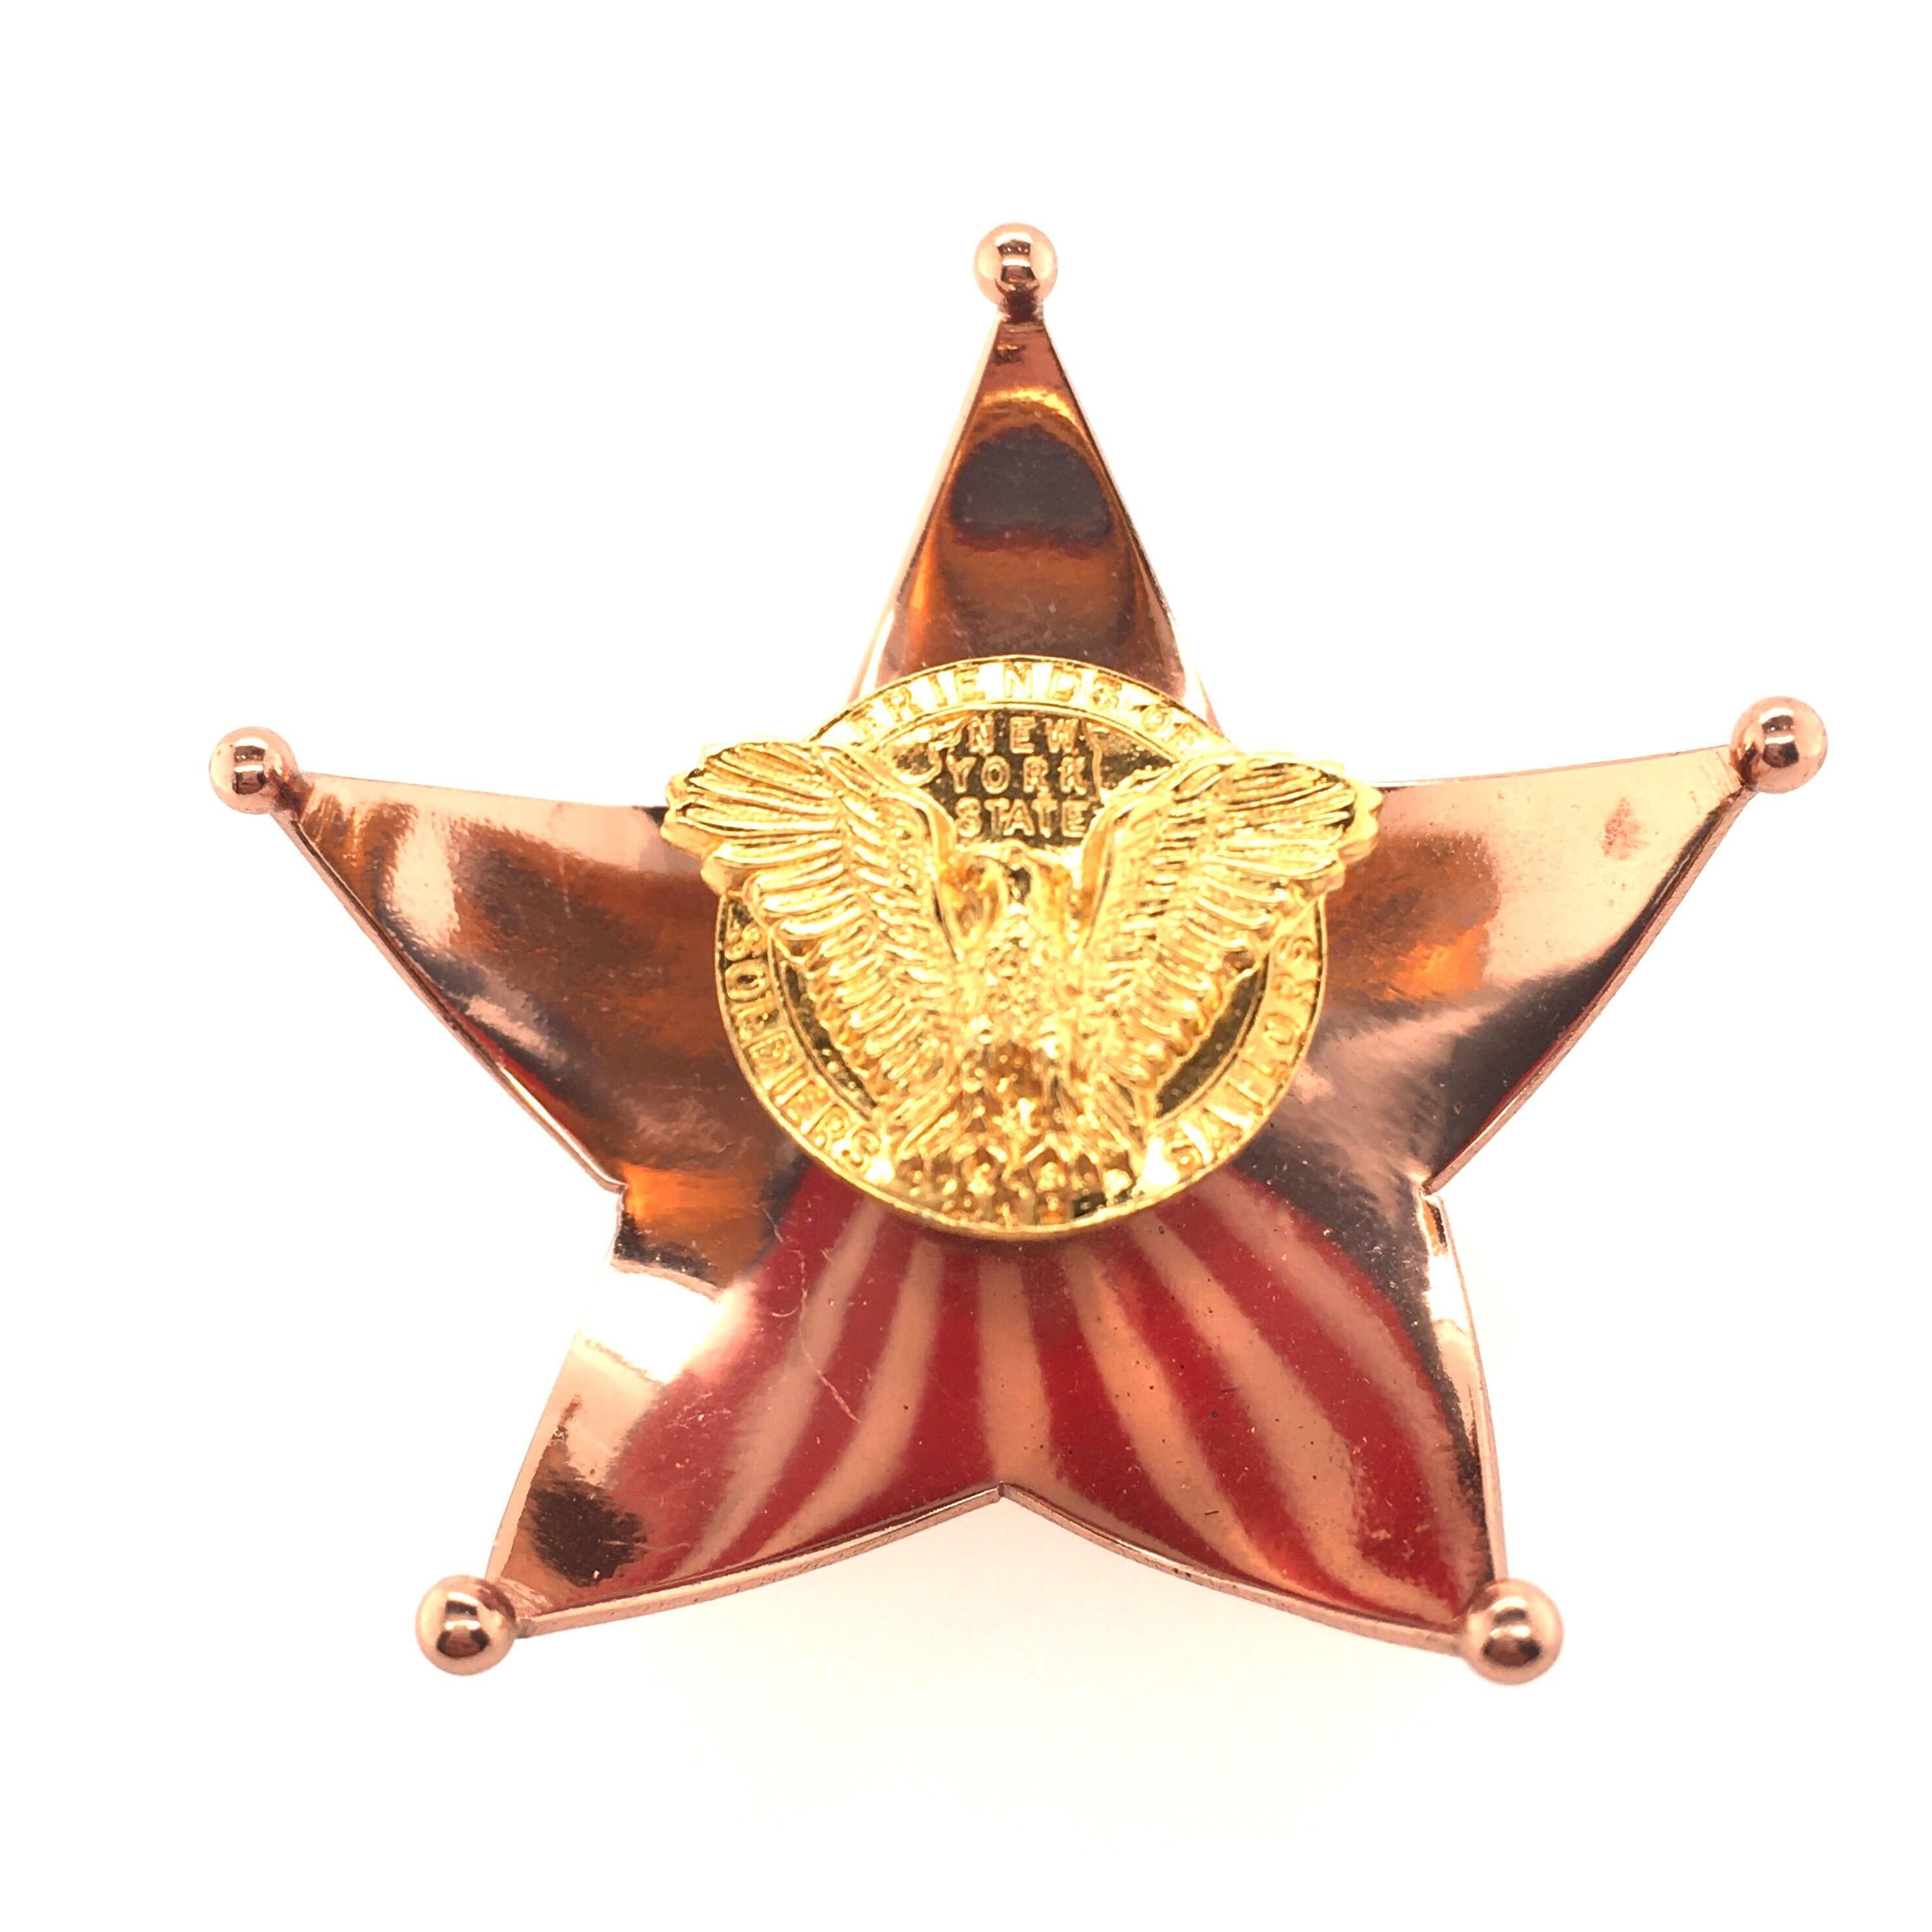 A gilt metal and enamel Stars and Stripes brooch, Cartier, circa 1940. Designed as a copper colored curving star, centering a flared en tremblant segment applied with red, white and blue enamel in an American flag motif, surmounted by an emblem of